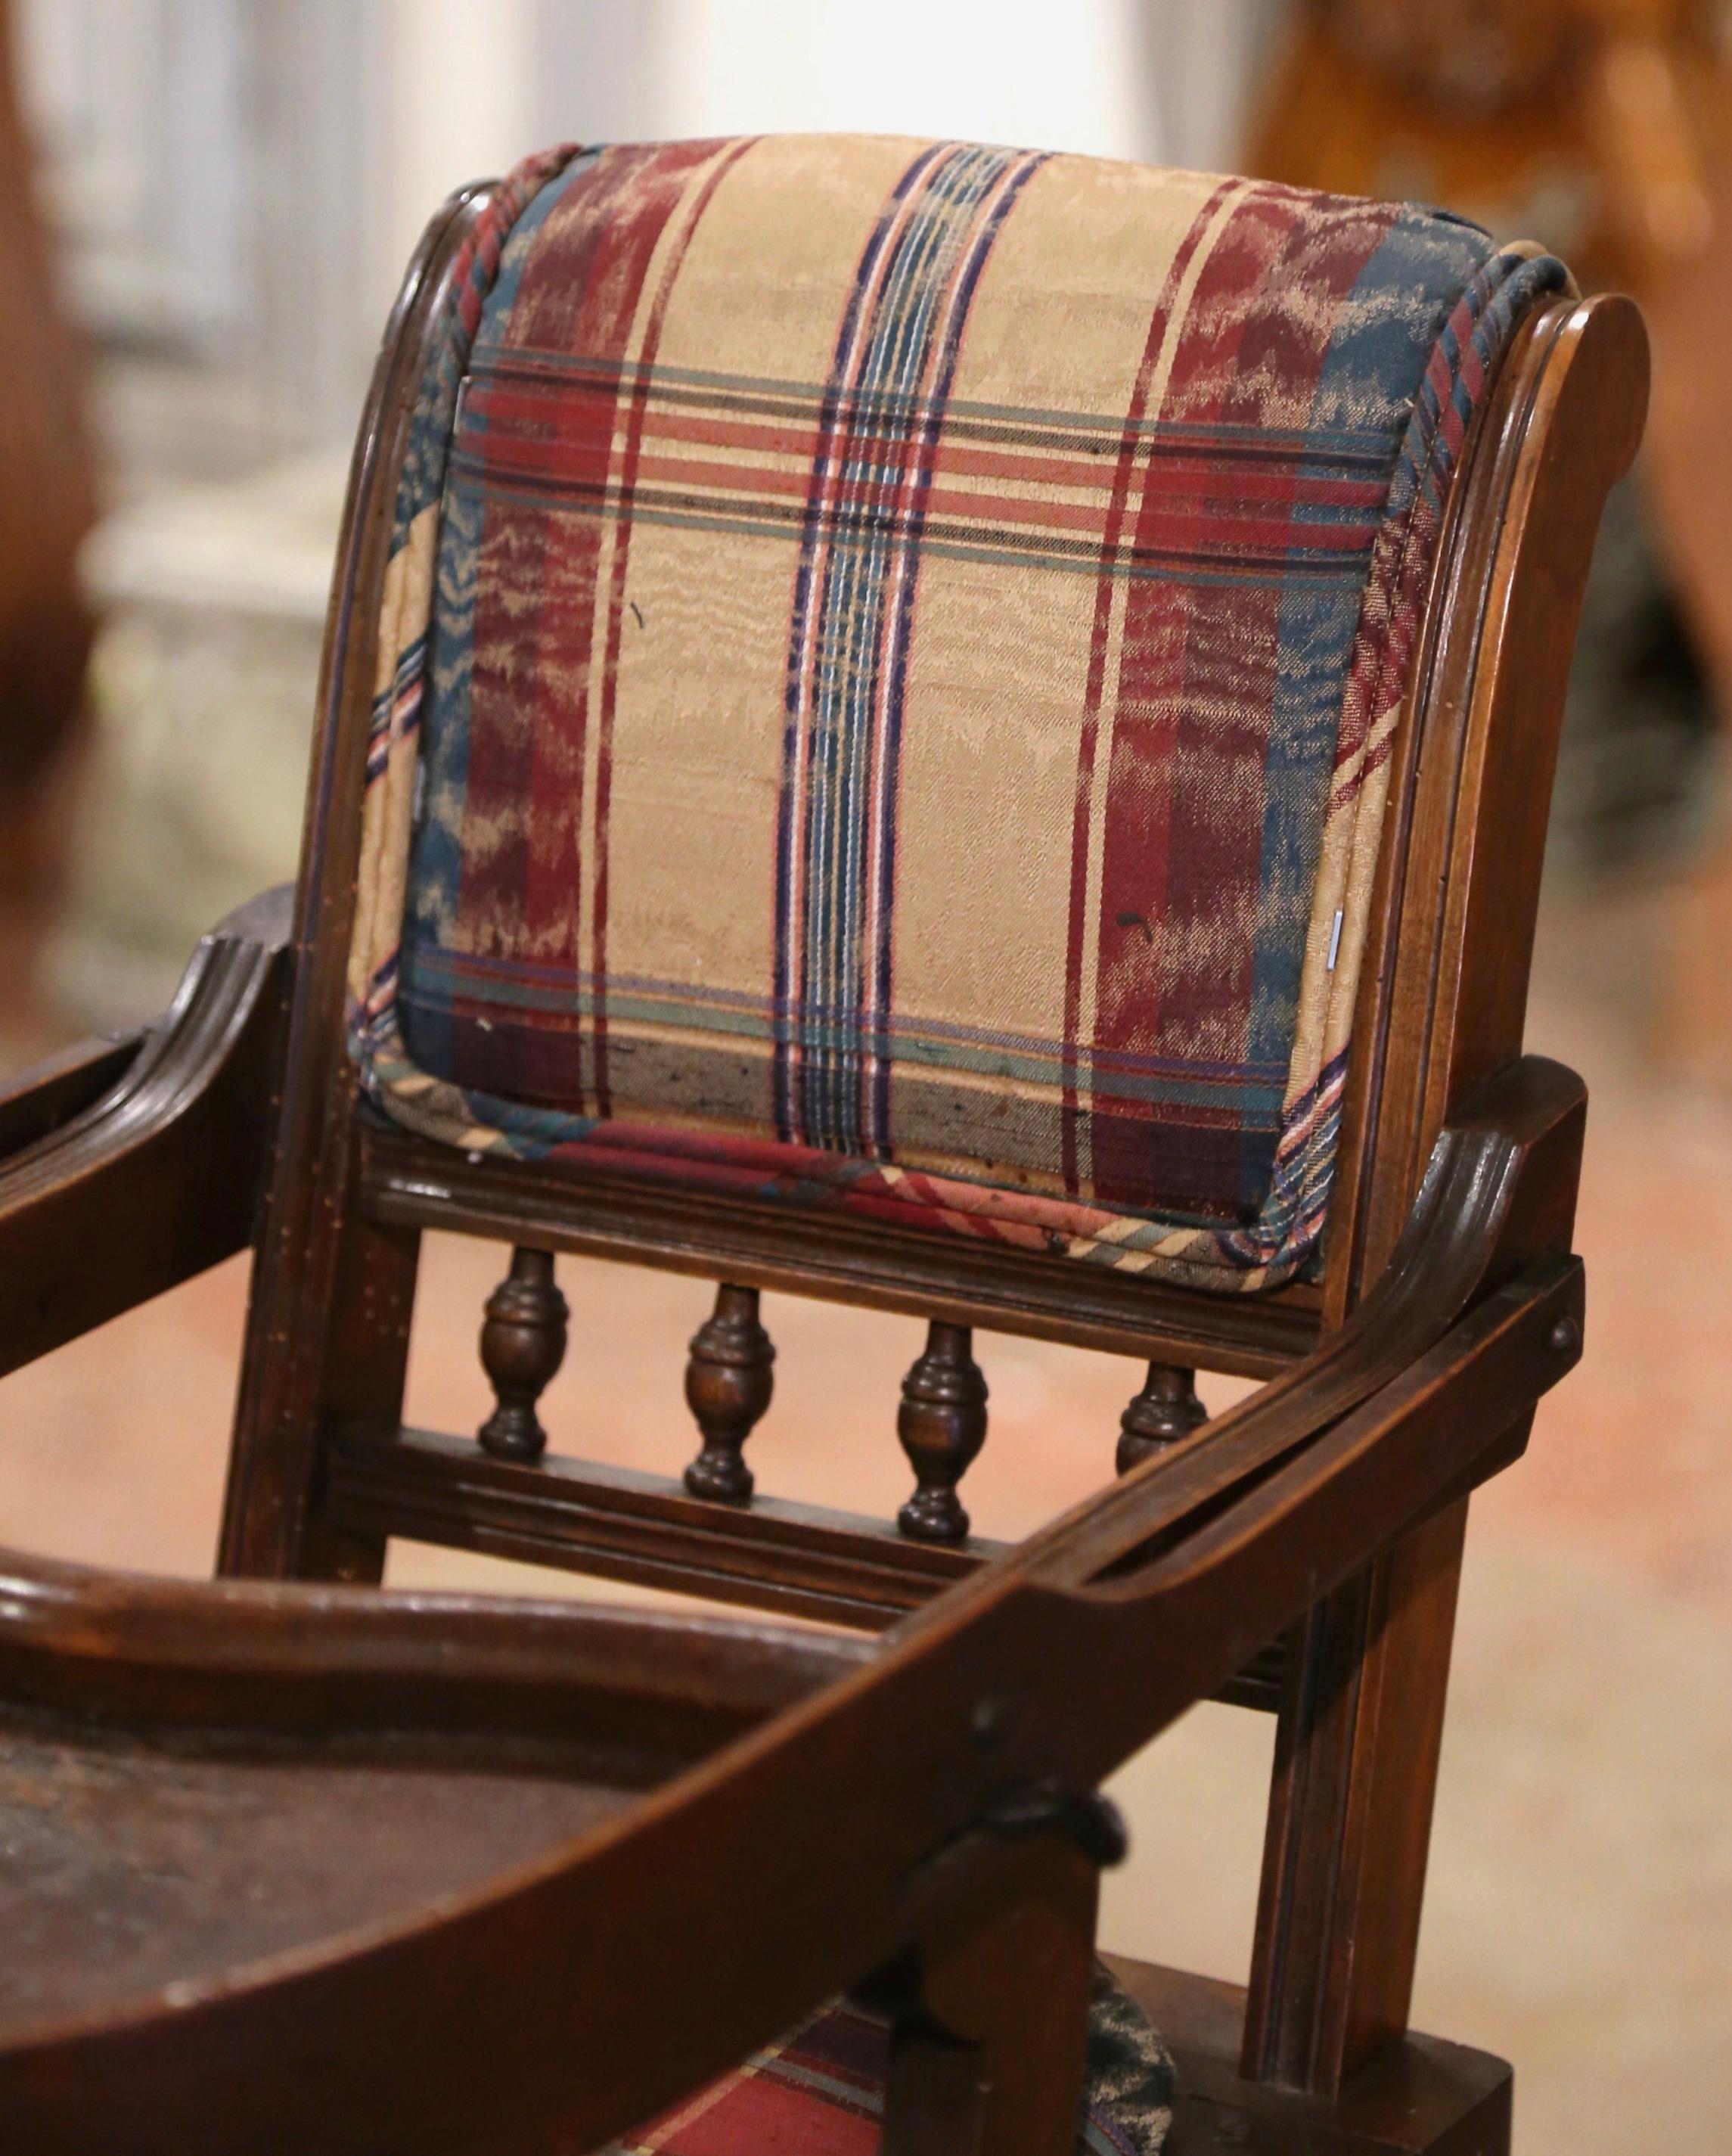 19th Century English Carved Walnut and Fabric Convertible High Chair to Rocker For Sale 1